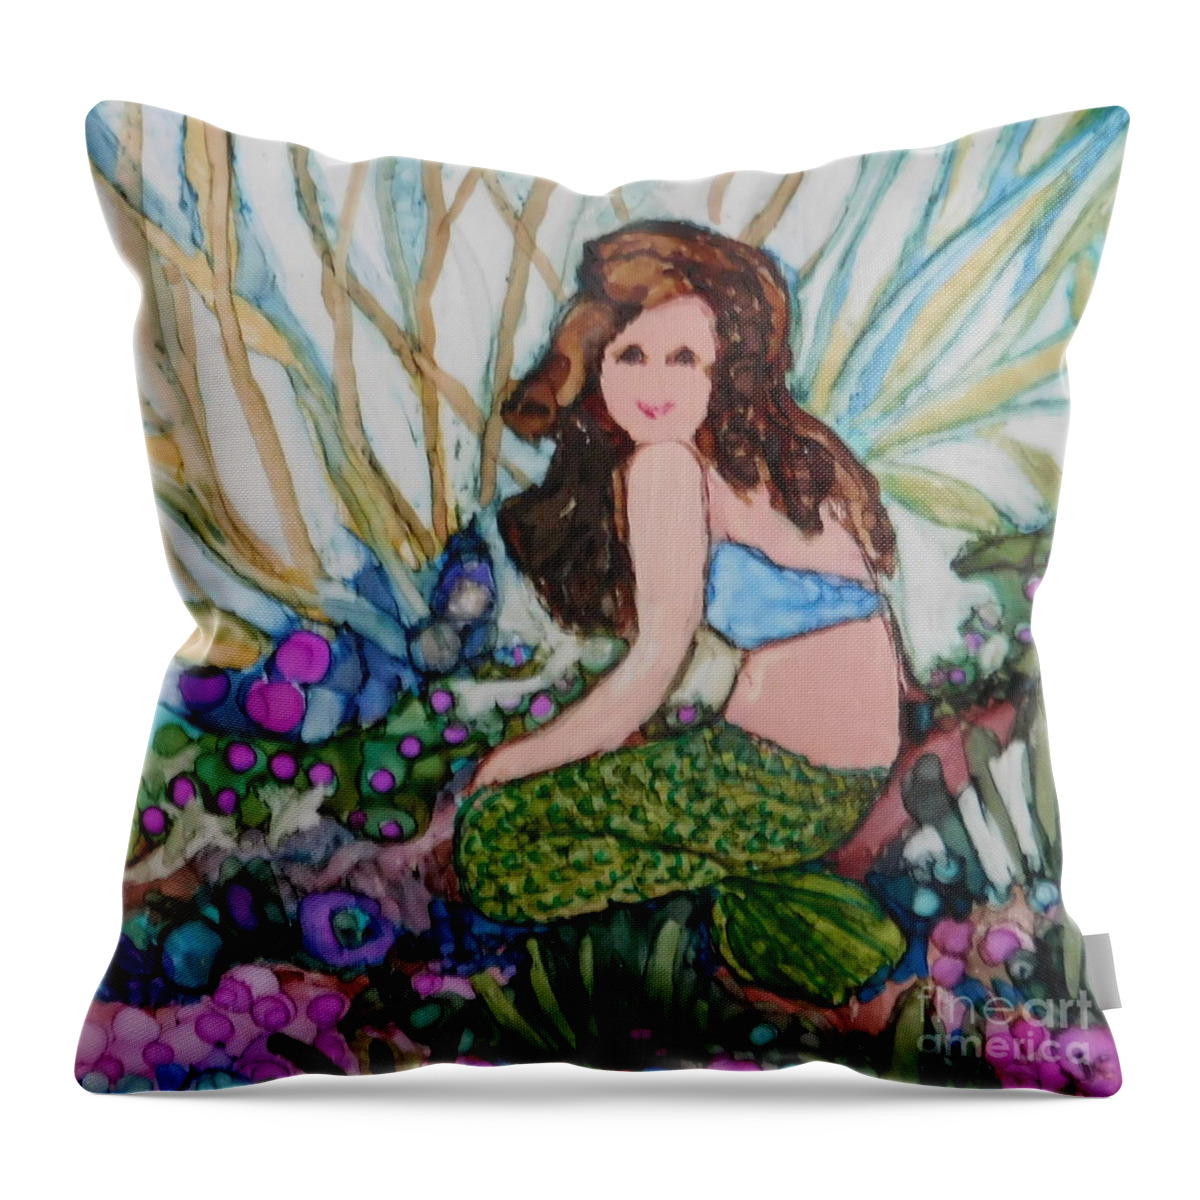 Tiny Mermaid Painted Just For Fun On 4 Square Tile Using Bright Colored Alcohol Ink. Throw Pillow featuring the painting Chloe by Joan Clear